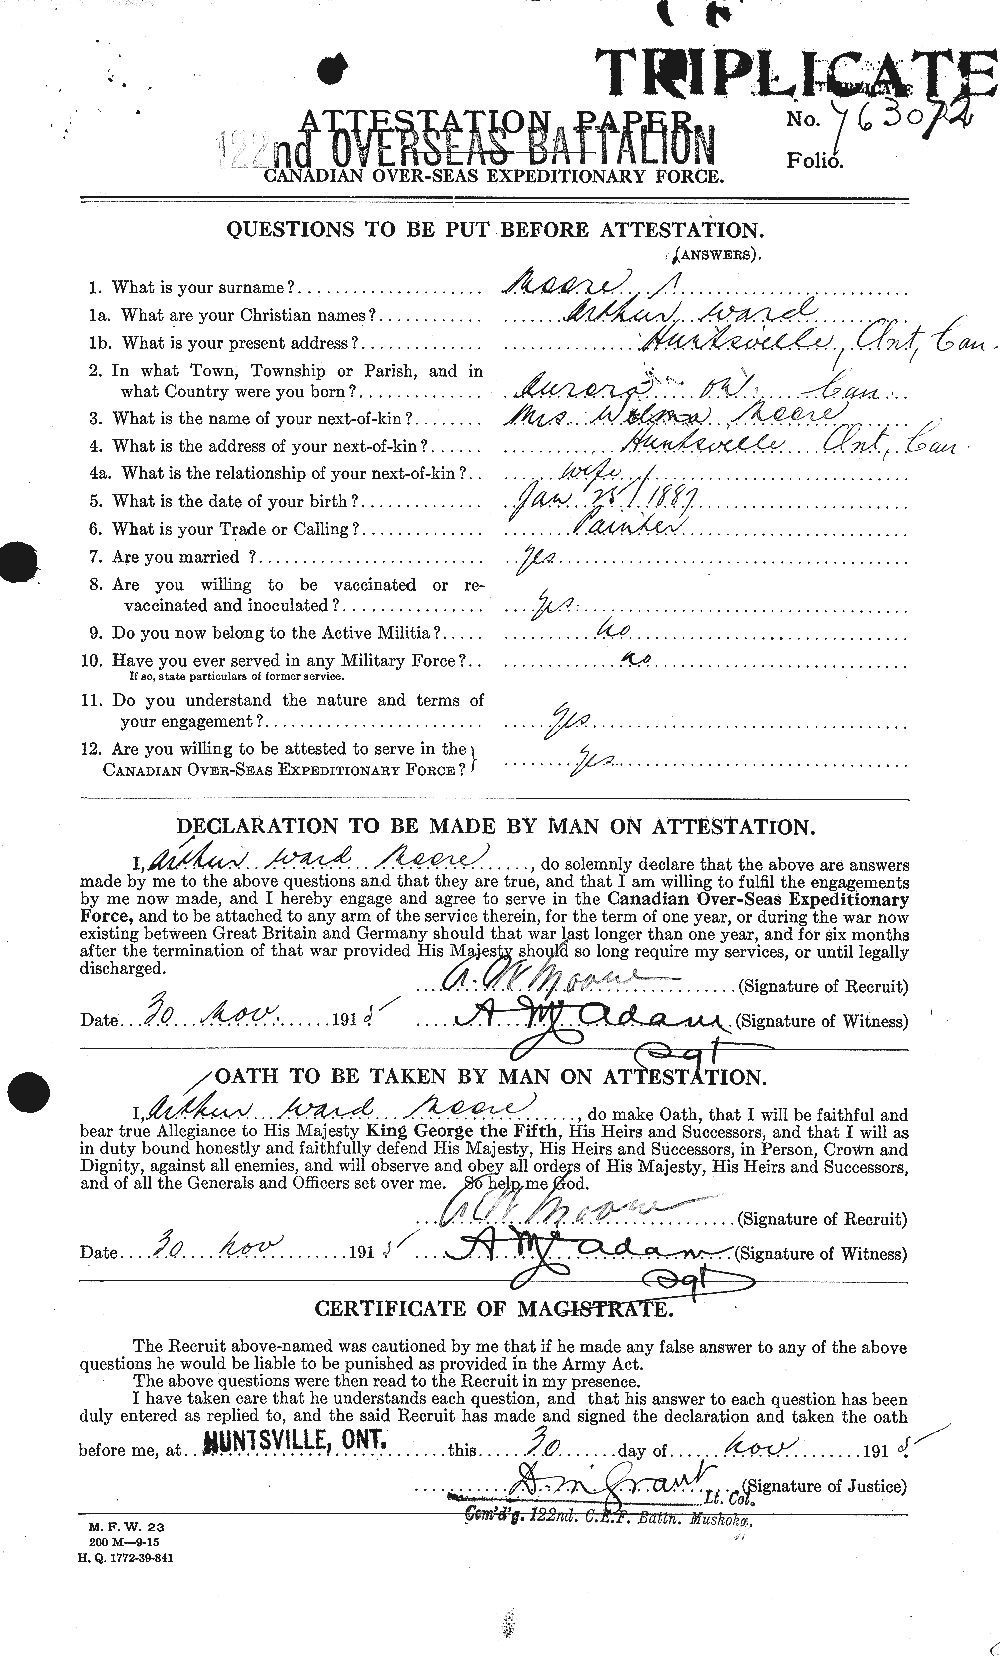 Personnel Records of the First World War - CEF 506456a